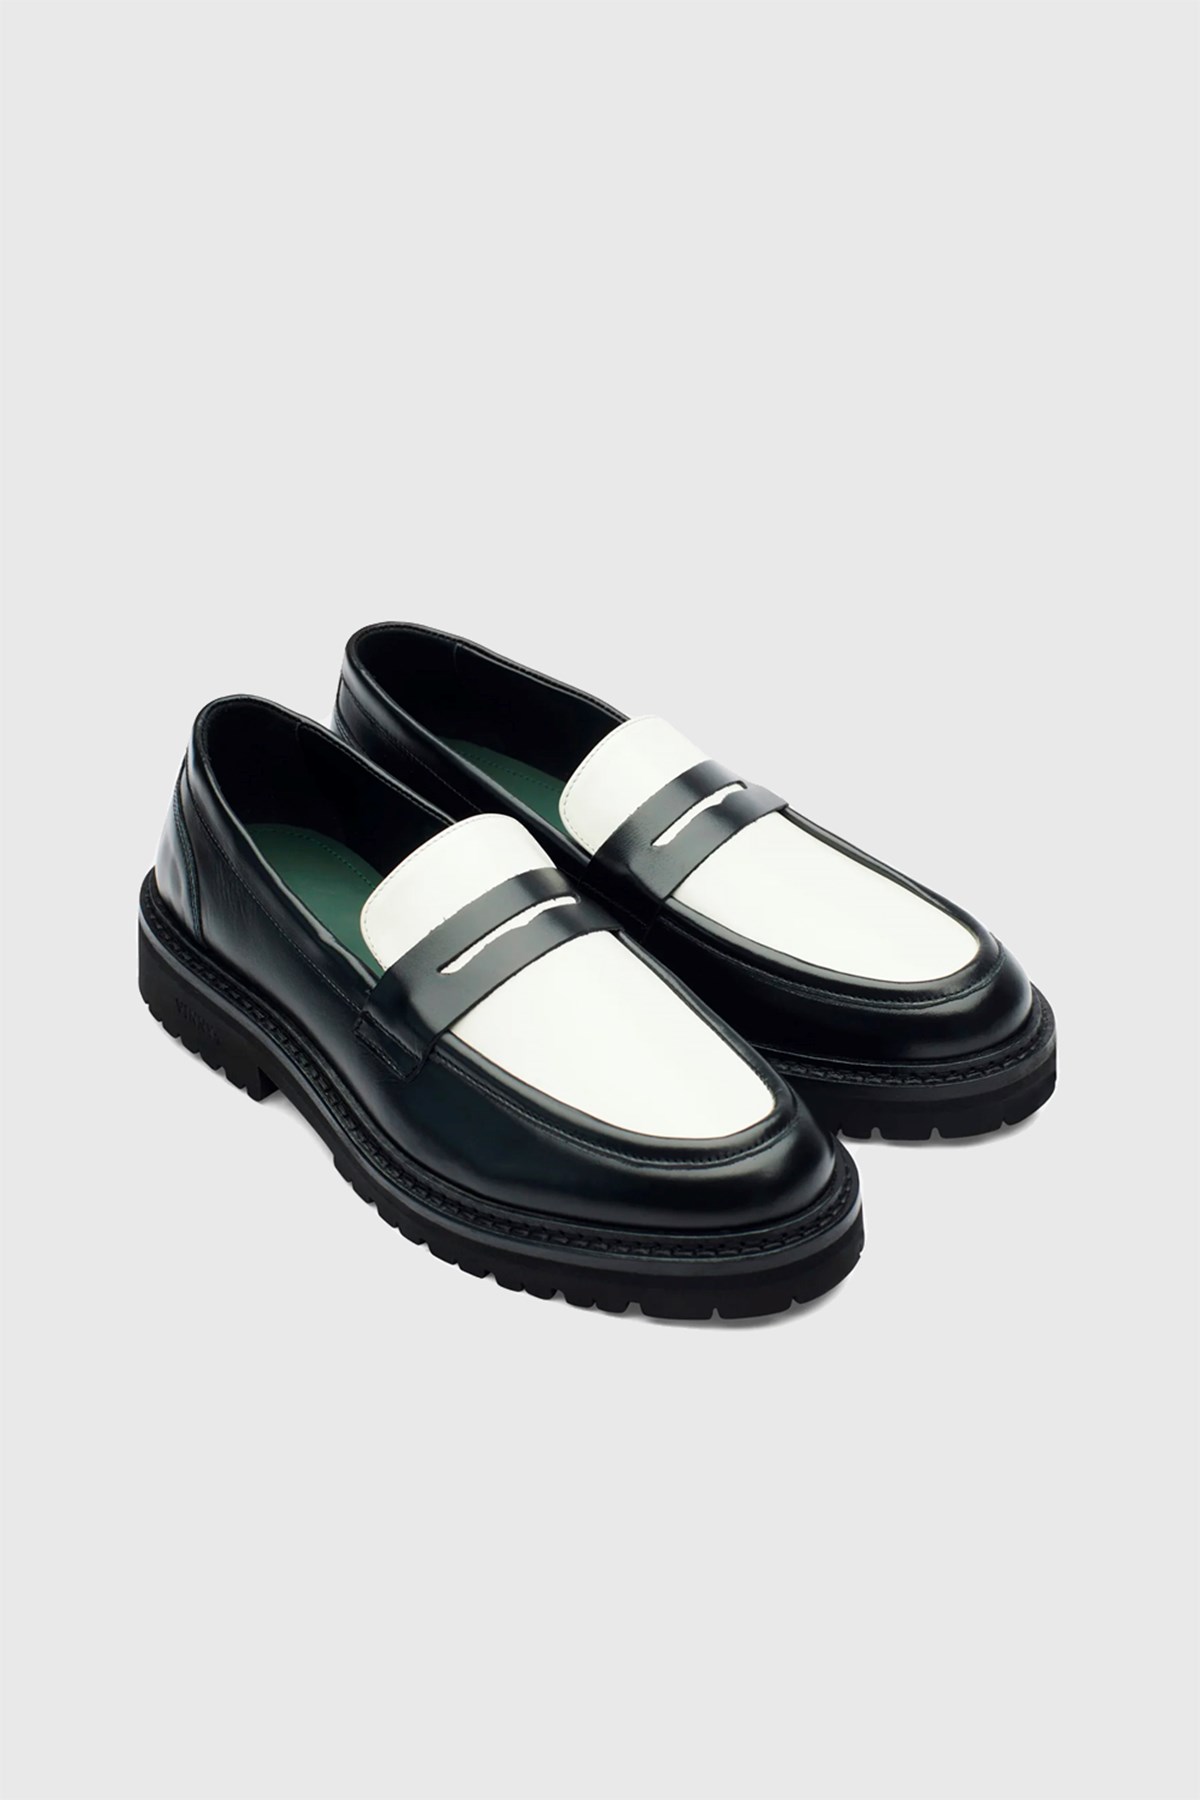 Vinny's Richee Two-Tone Loafer Black & white crust leather | WoodWood.com